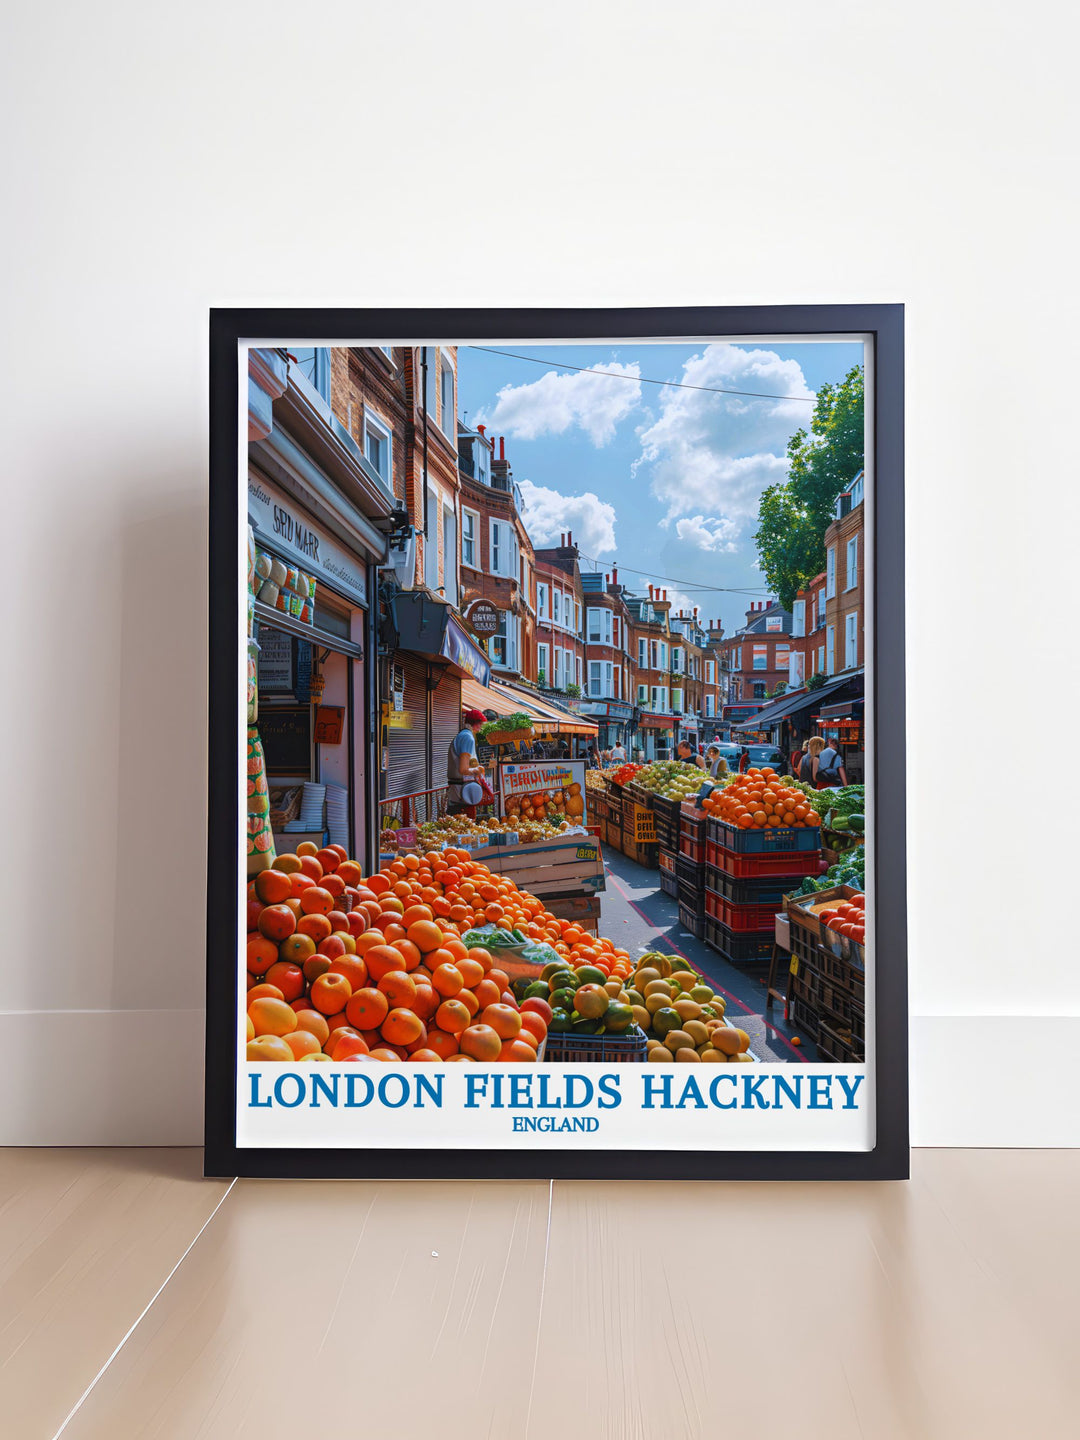 Bring the vibrant culture of Broadway Market into your home with this travel poster, capturing its bustling stalls and lively atmosphere, ideal for any local culture enthusiast.